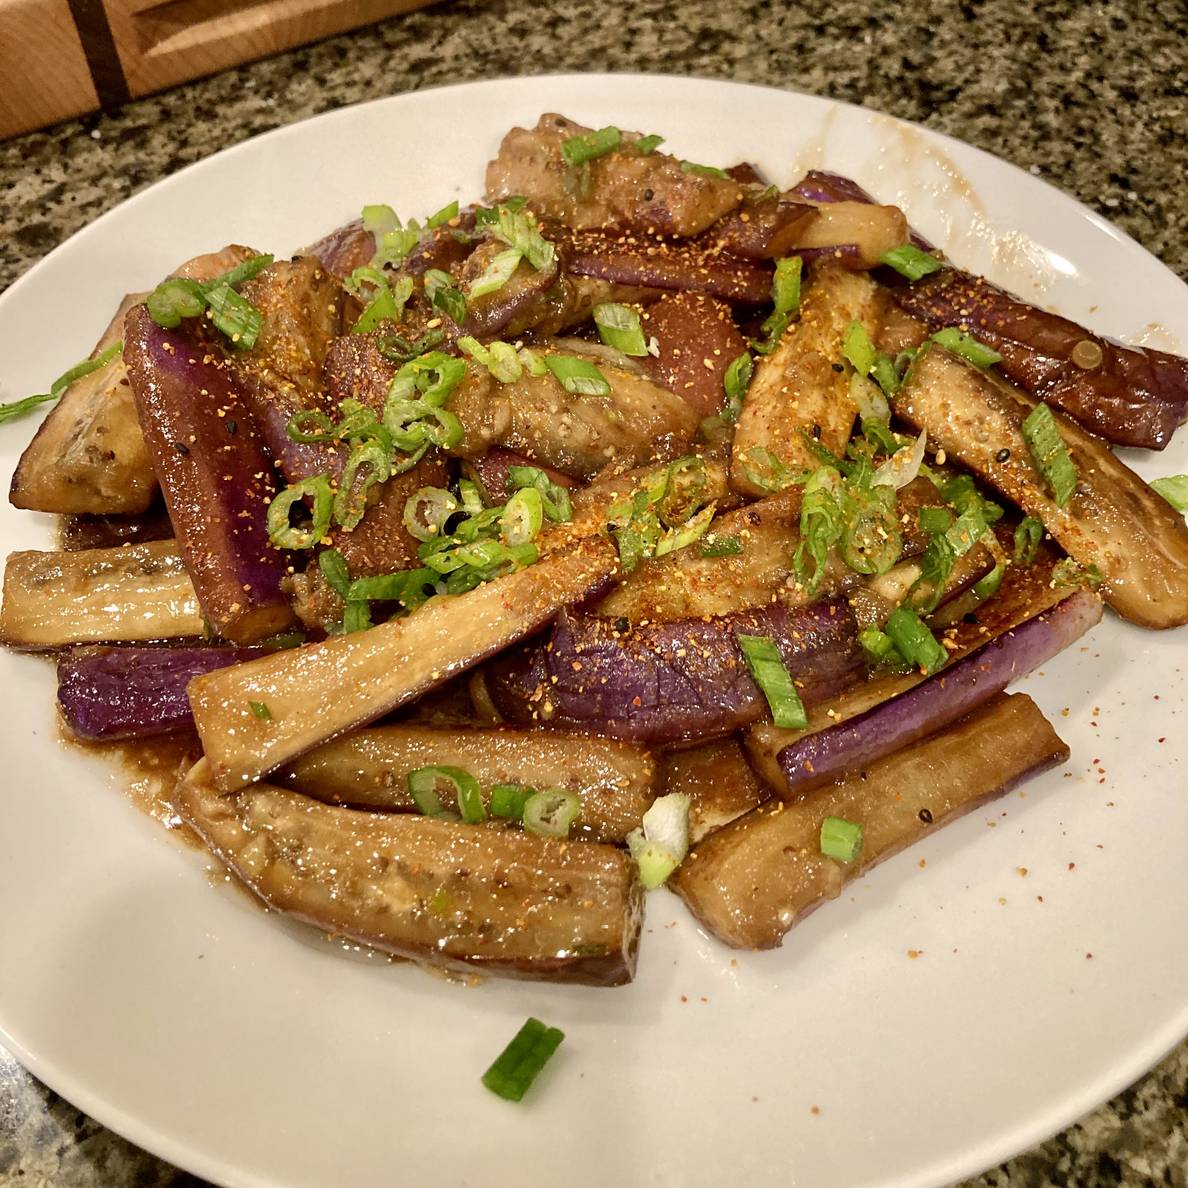 A plate of Chinese eggplant with some sauce.